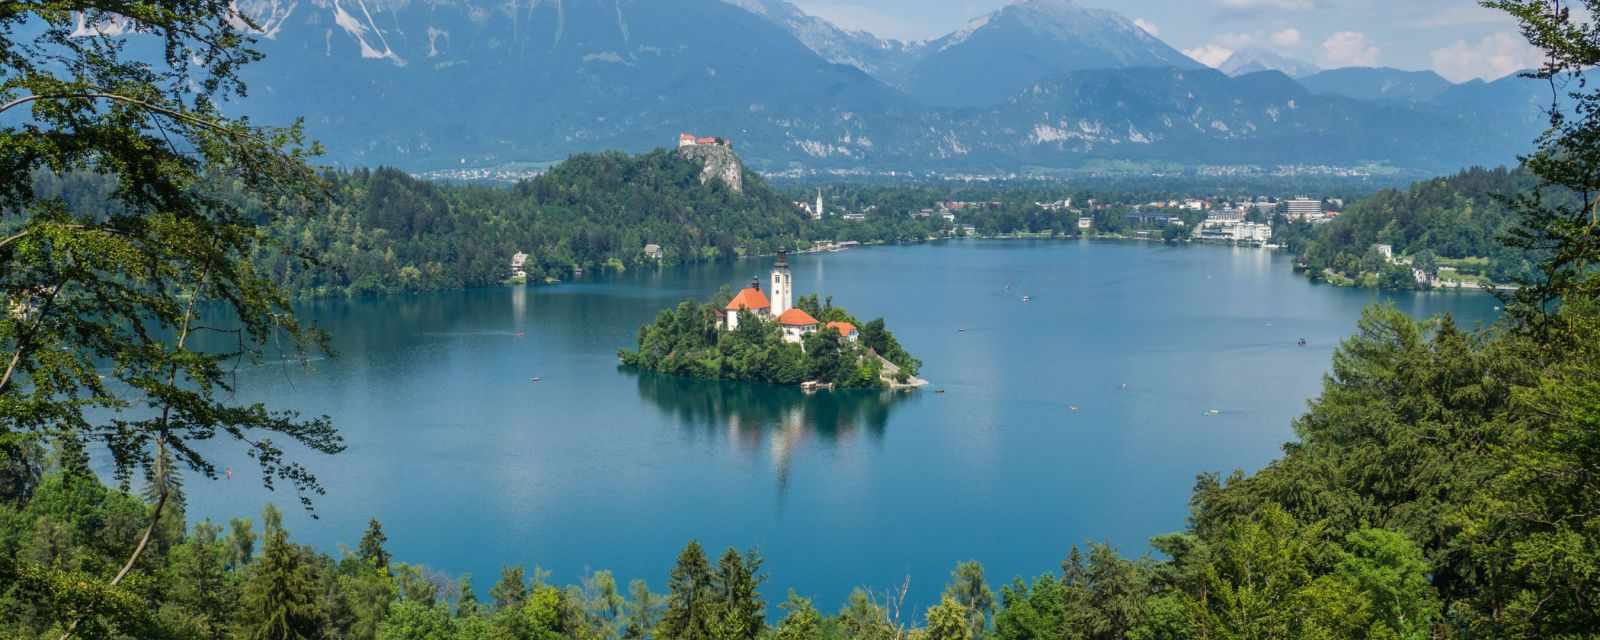 Lake Bled in Slovenia - 7 Facts and 5 Things to Do